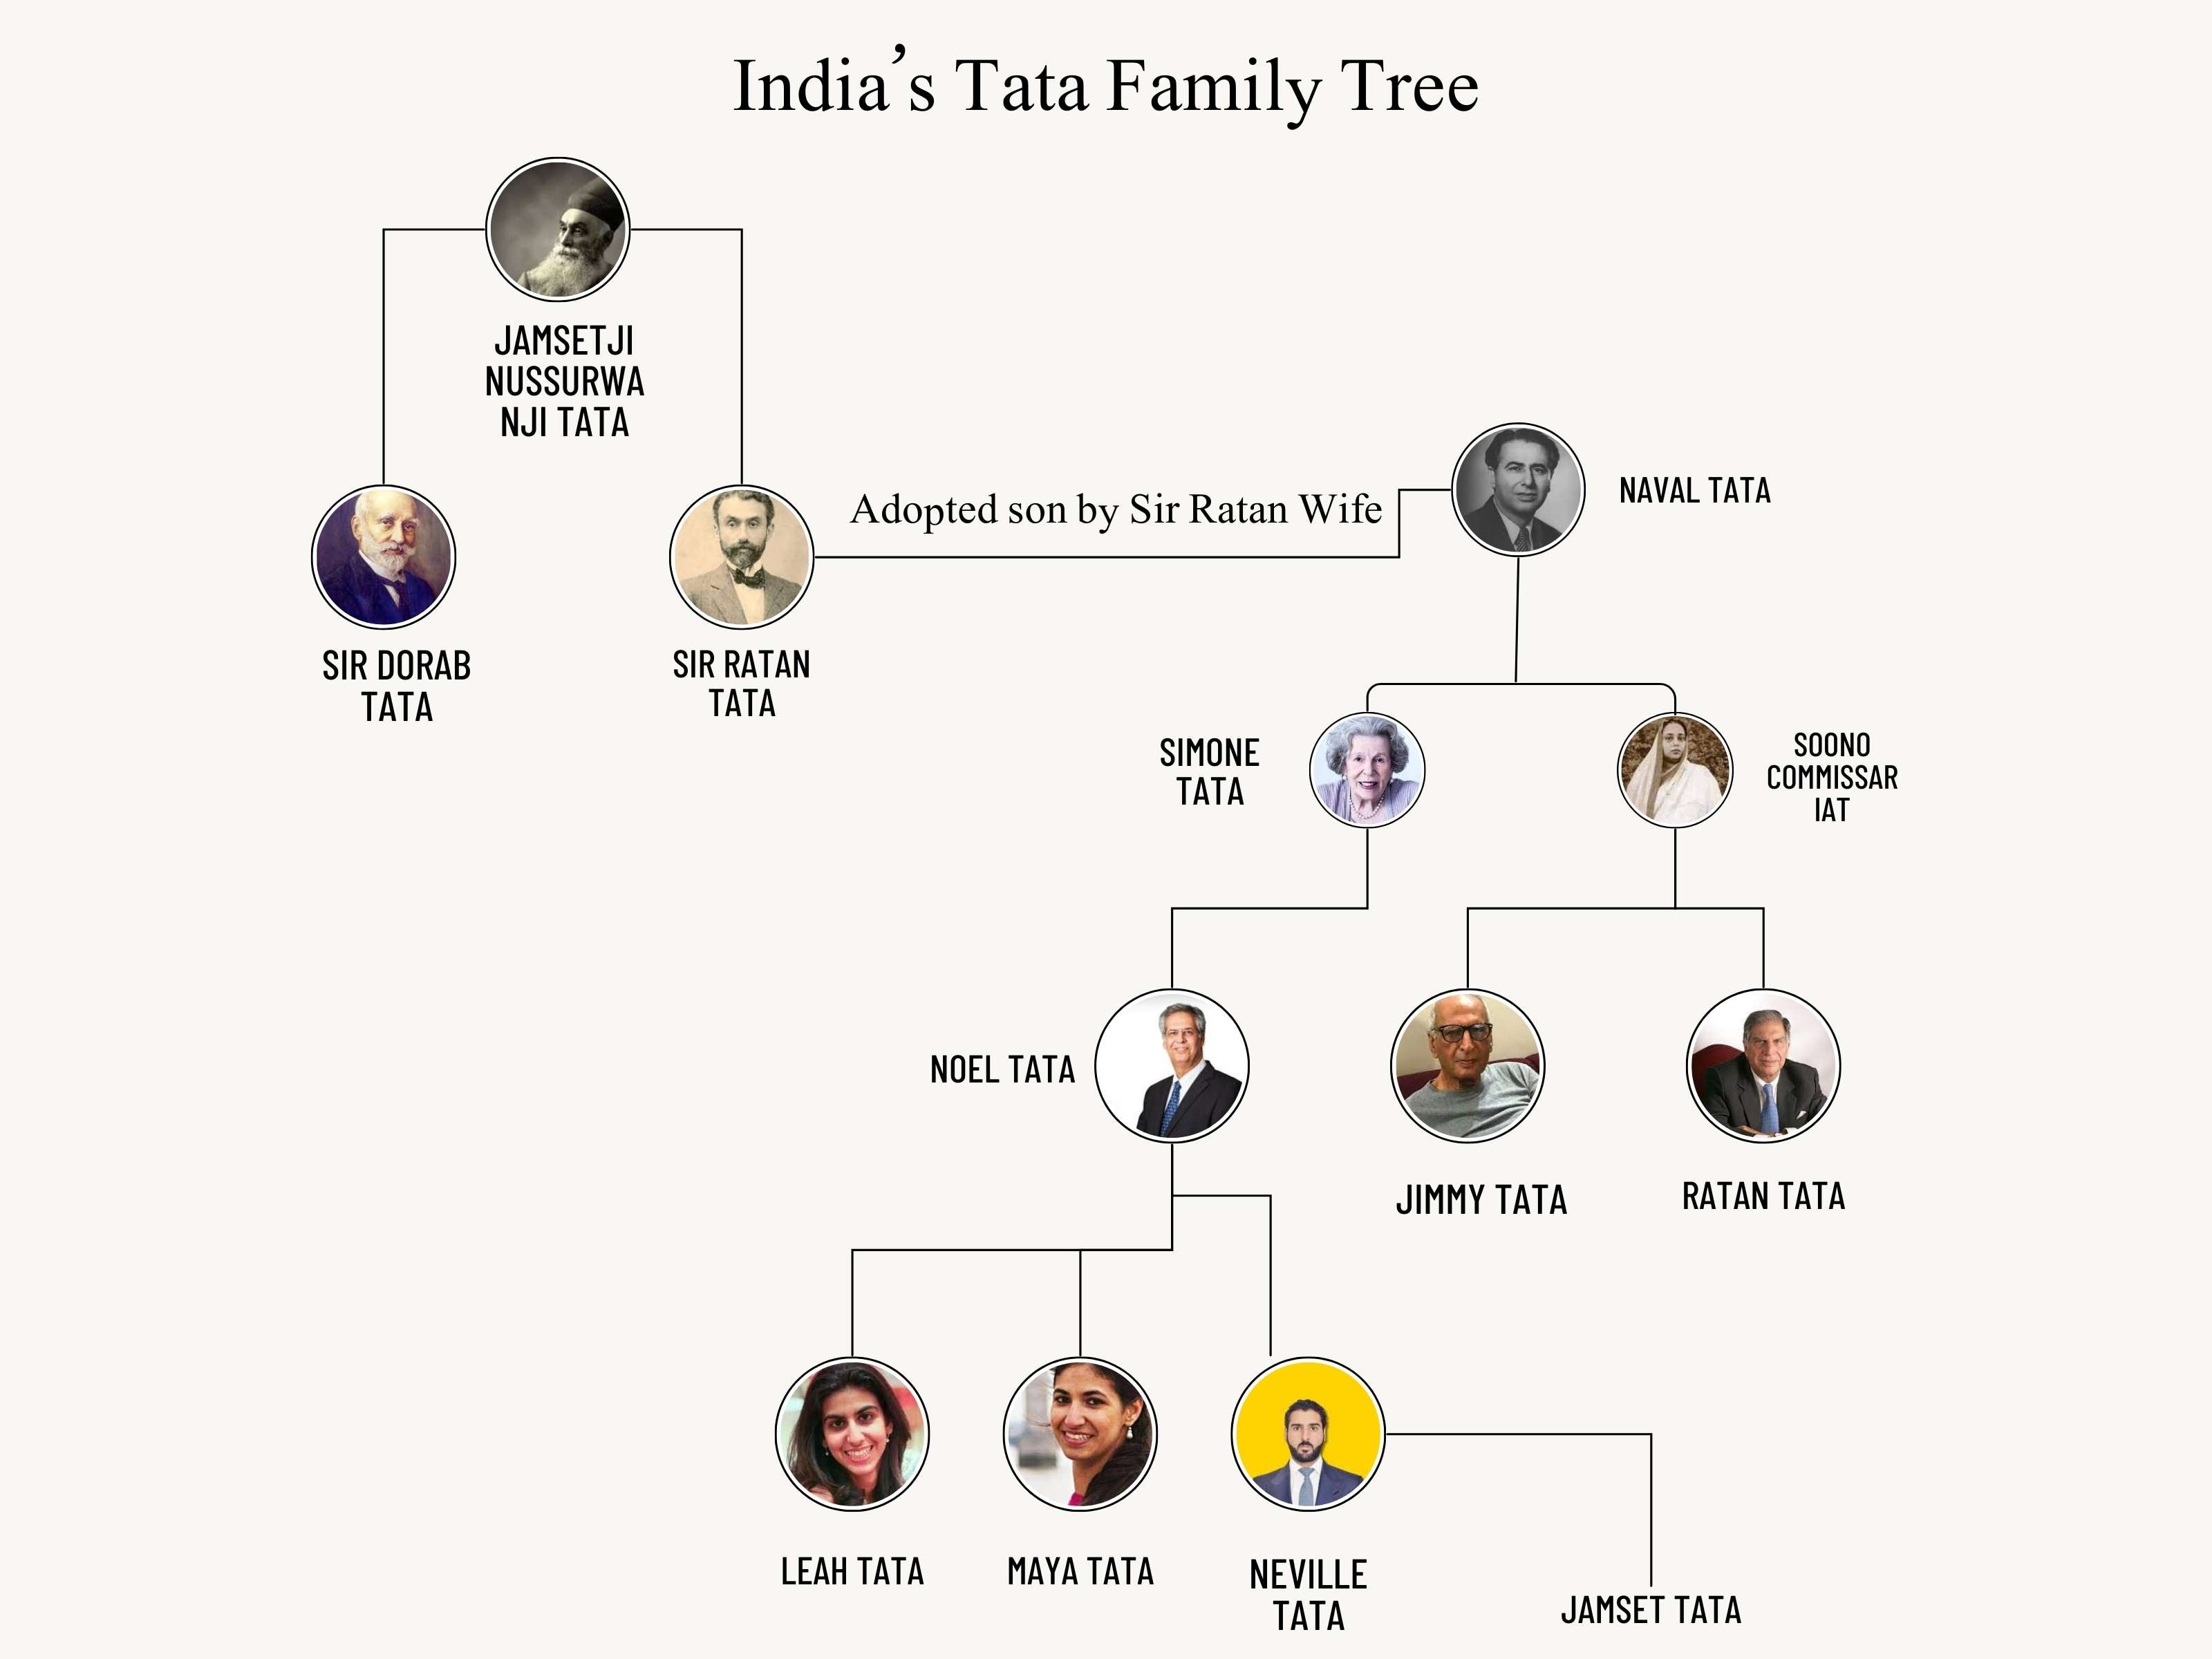 family tree for the Tata group